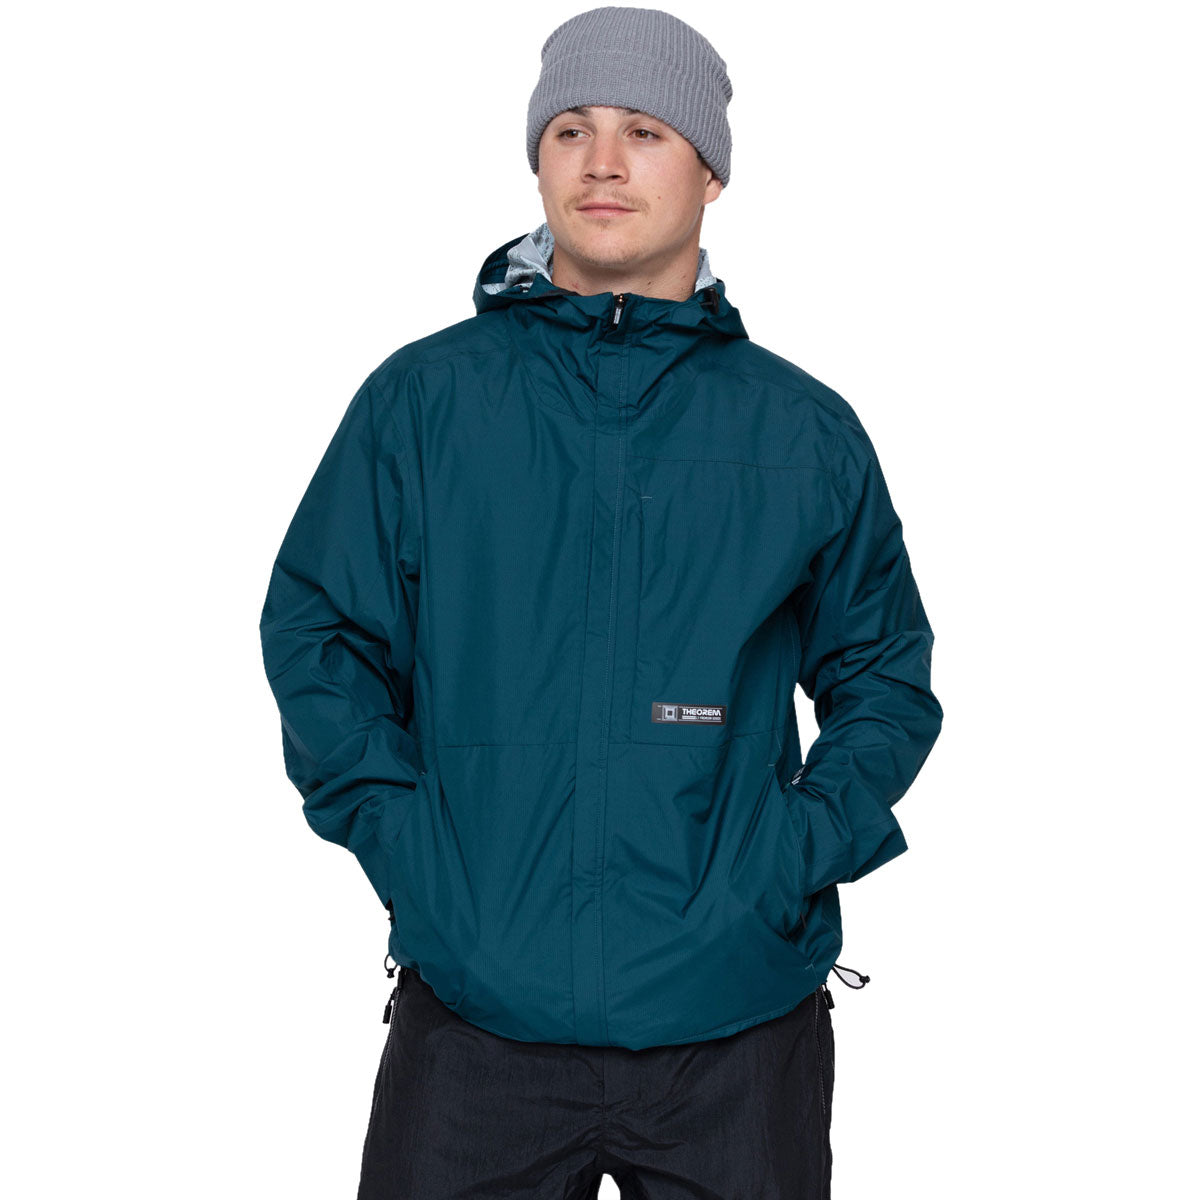 L1 Diffuse 2024 Snowboard Jacket - Abyss image 1